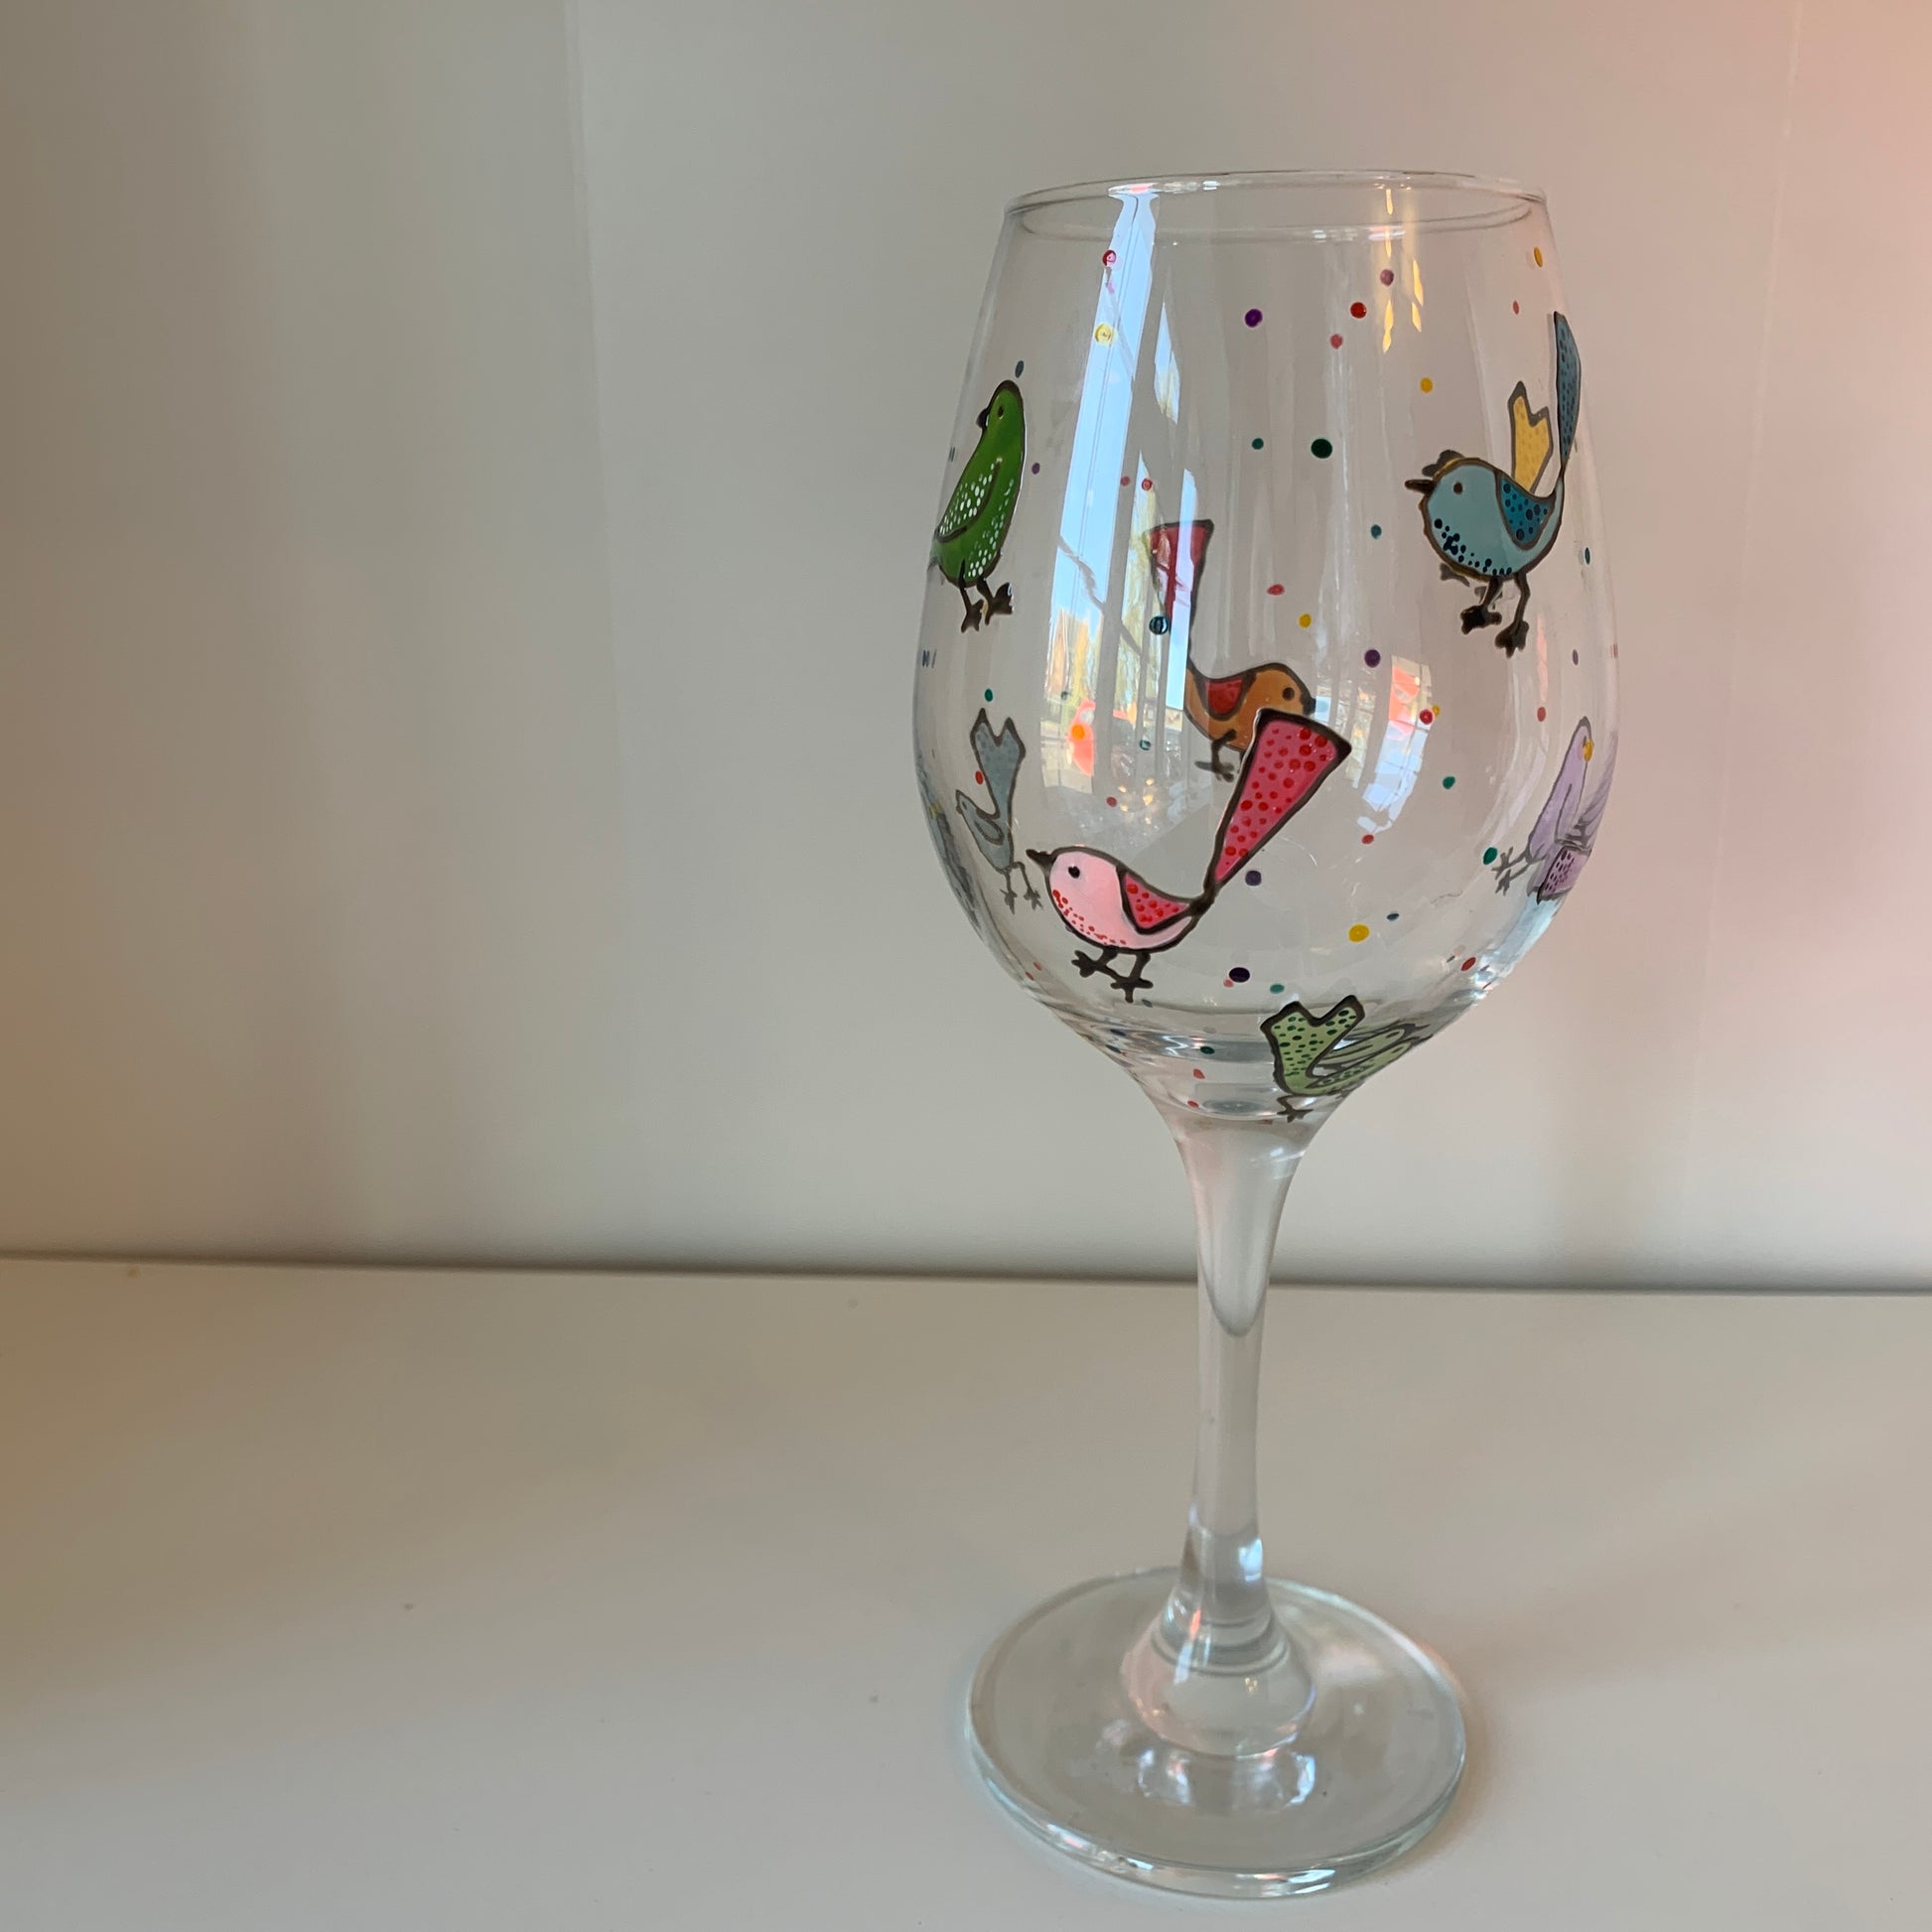 Rainbow Clouds Wine Glasses Hand Painted, Set of 2 -  Norway